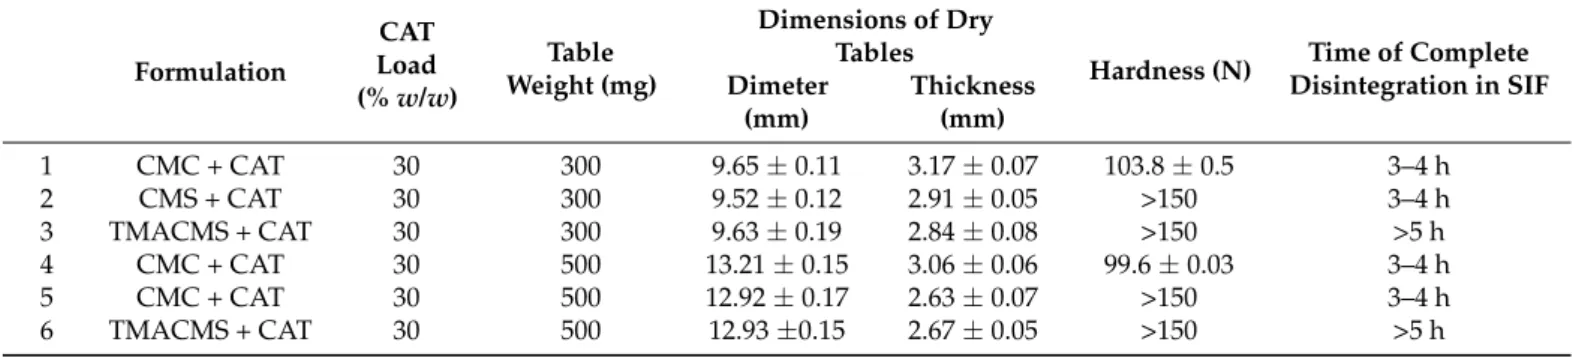 Table 1. Summary of the physical properties of tablets with 30% catalase (CAT) loading